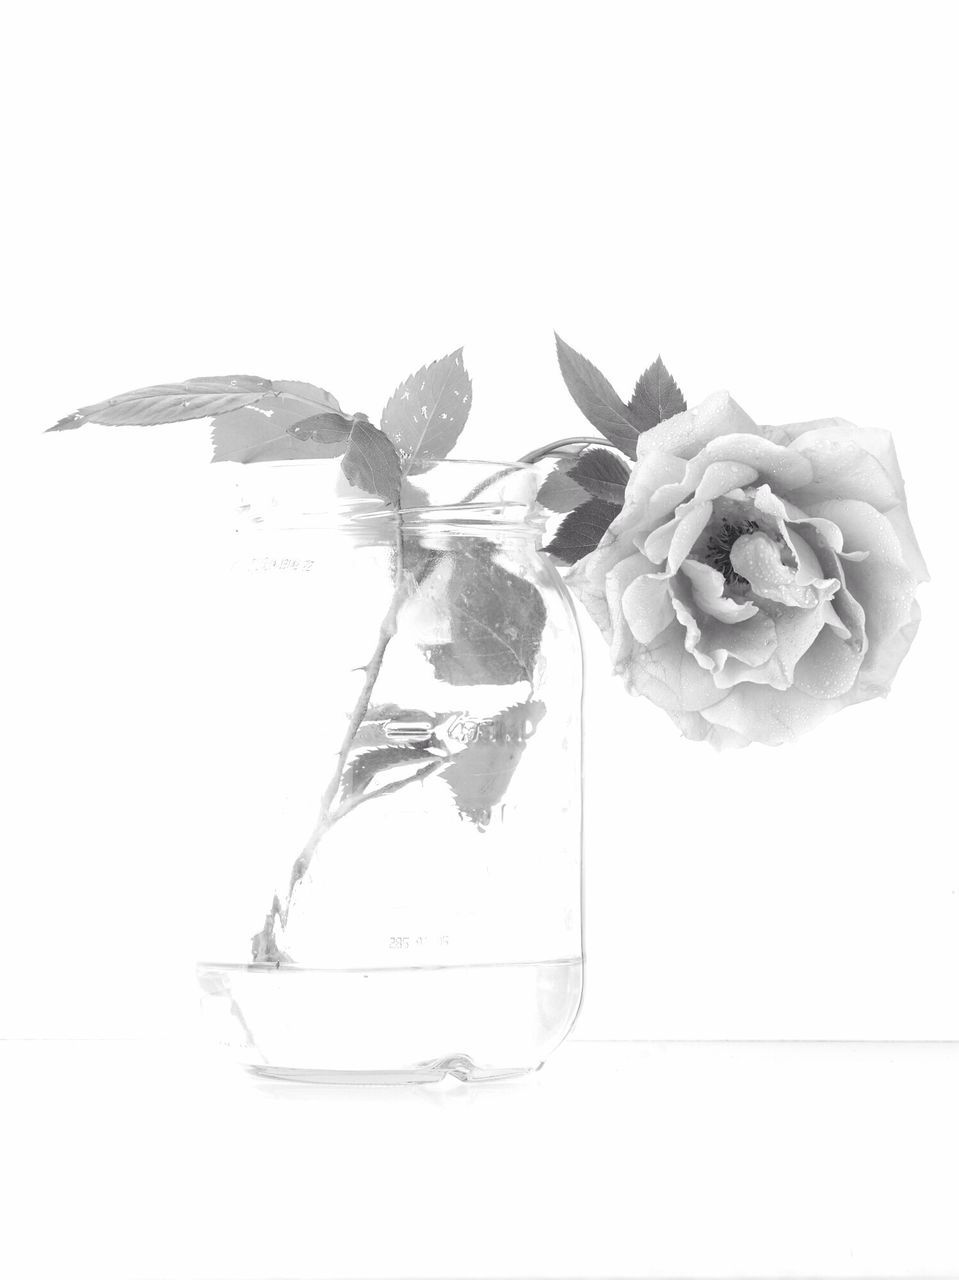 studio shot, white background, still life, close-up, copy space, single object, art and craft, flower, cut out, freshness, creativity, fragility, no people, art, high angle view, ideas, indoors, white color, two objects, table